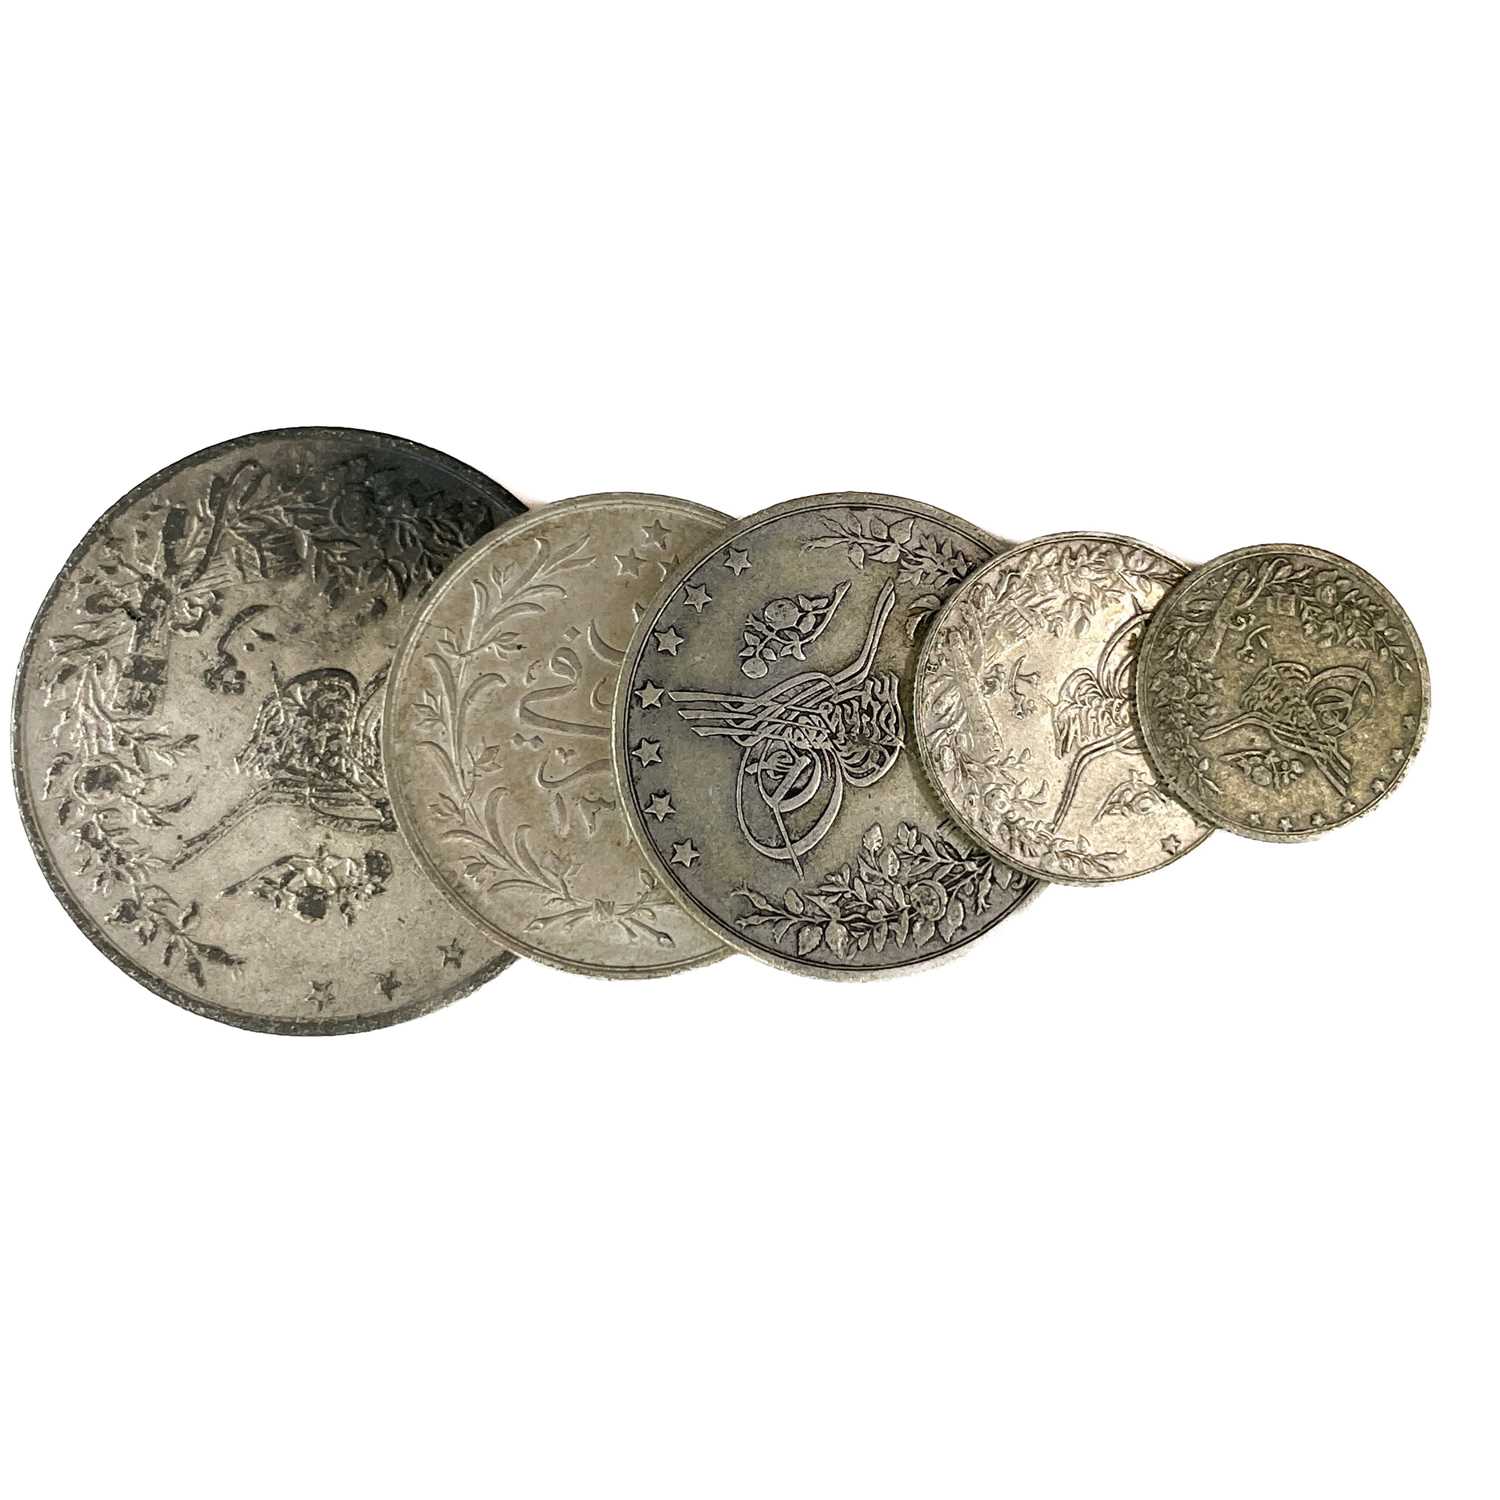 Late 19th/Early 20th Century Egypt Silver Coinage. - Image 5 of 5